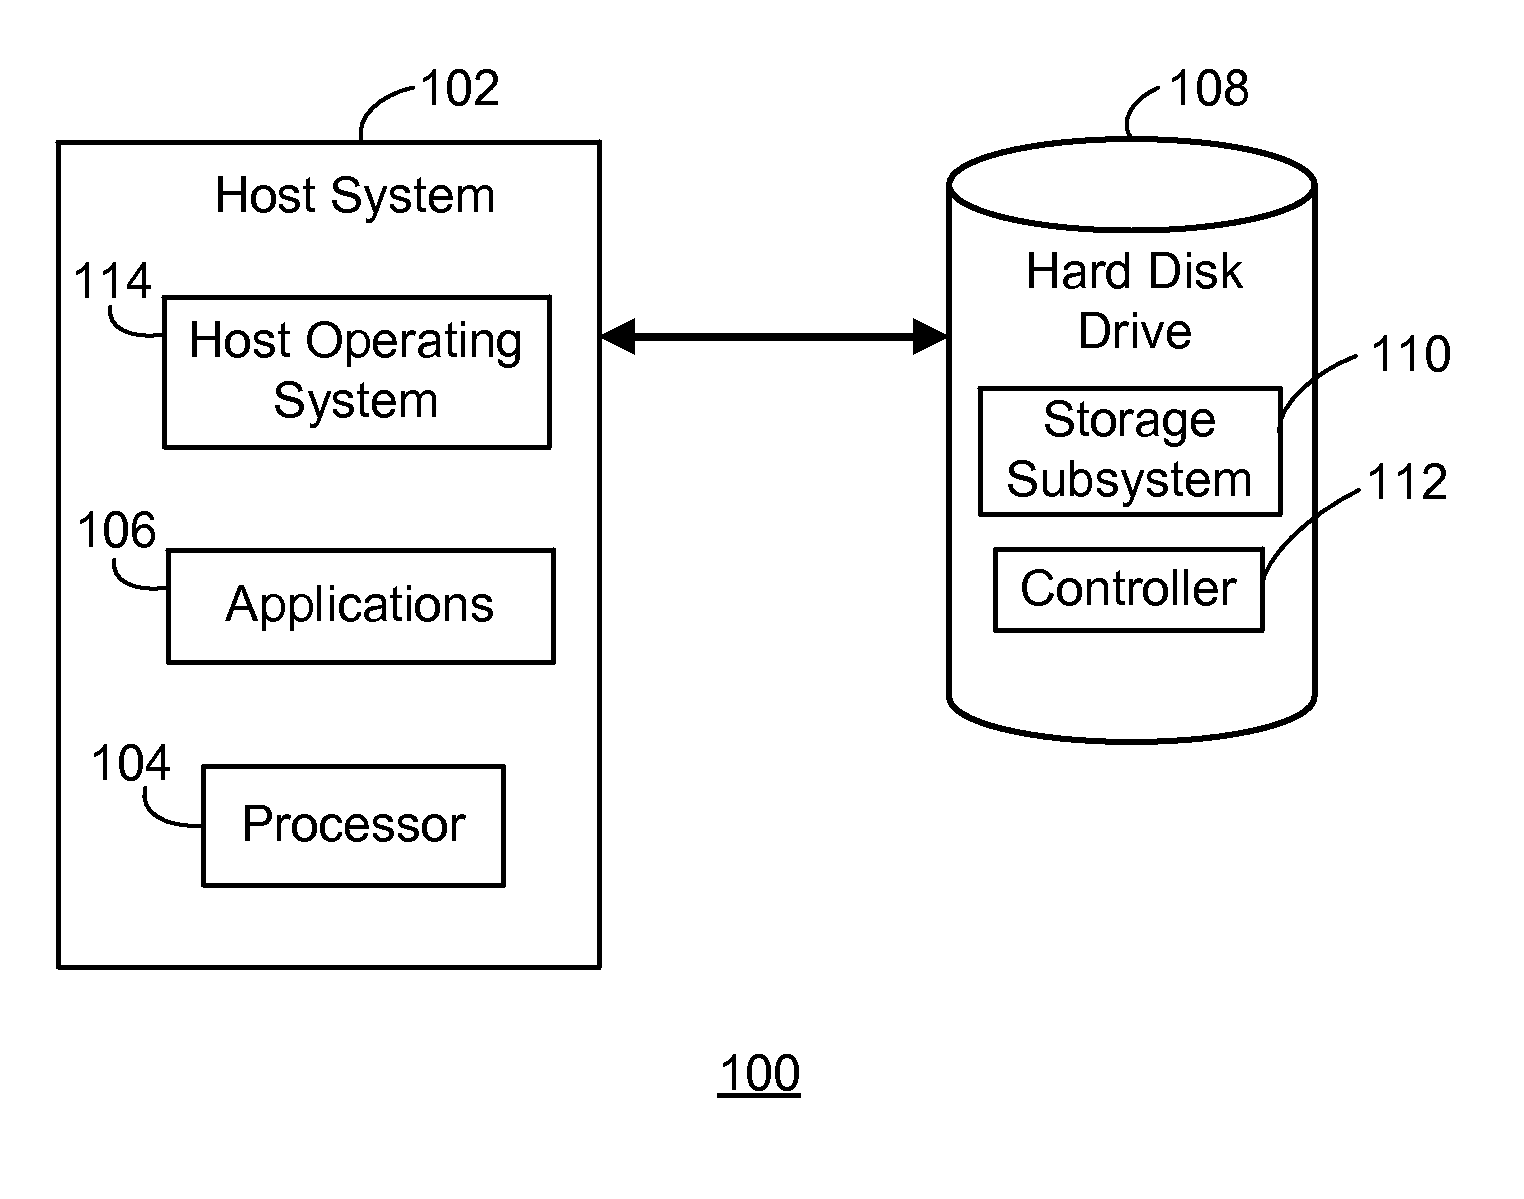 Random Number Generation For a Host System Using a Hard Disk Drive